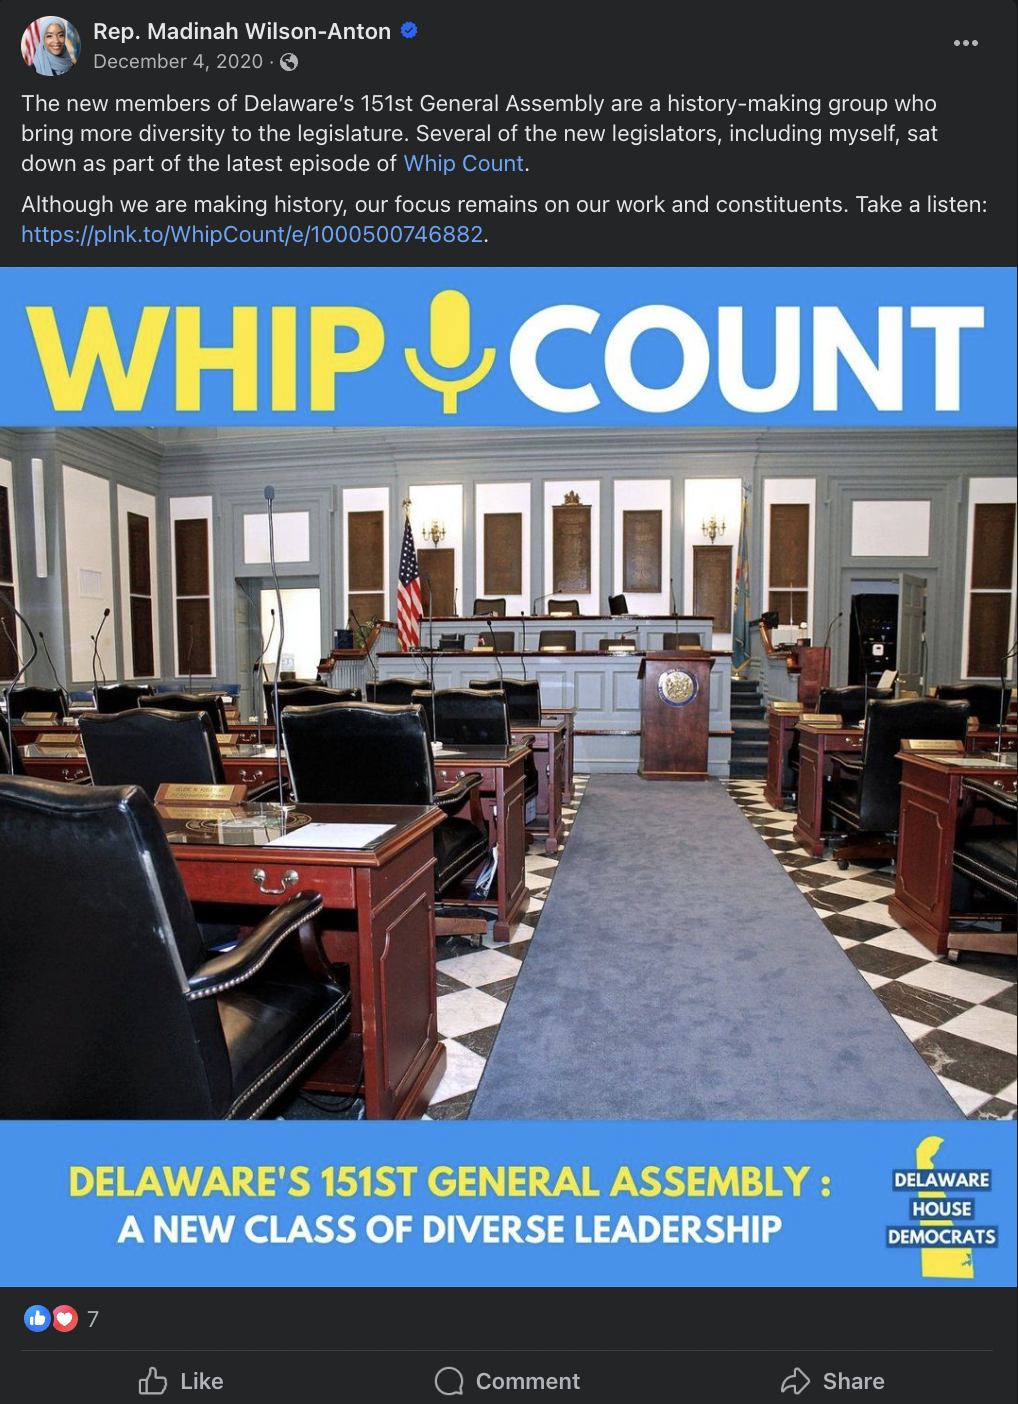 Whip Count podcast with Rep. Madinah Wilson-Anton episode shared to facebook with Plink podcast link in 2020